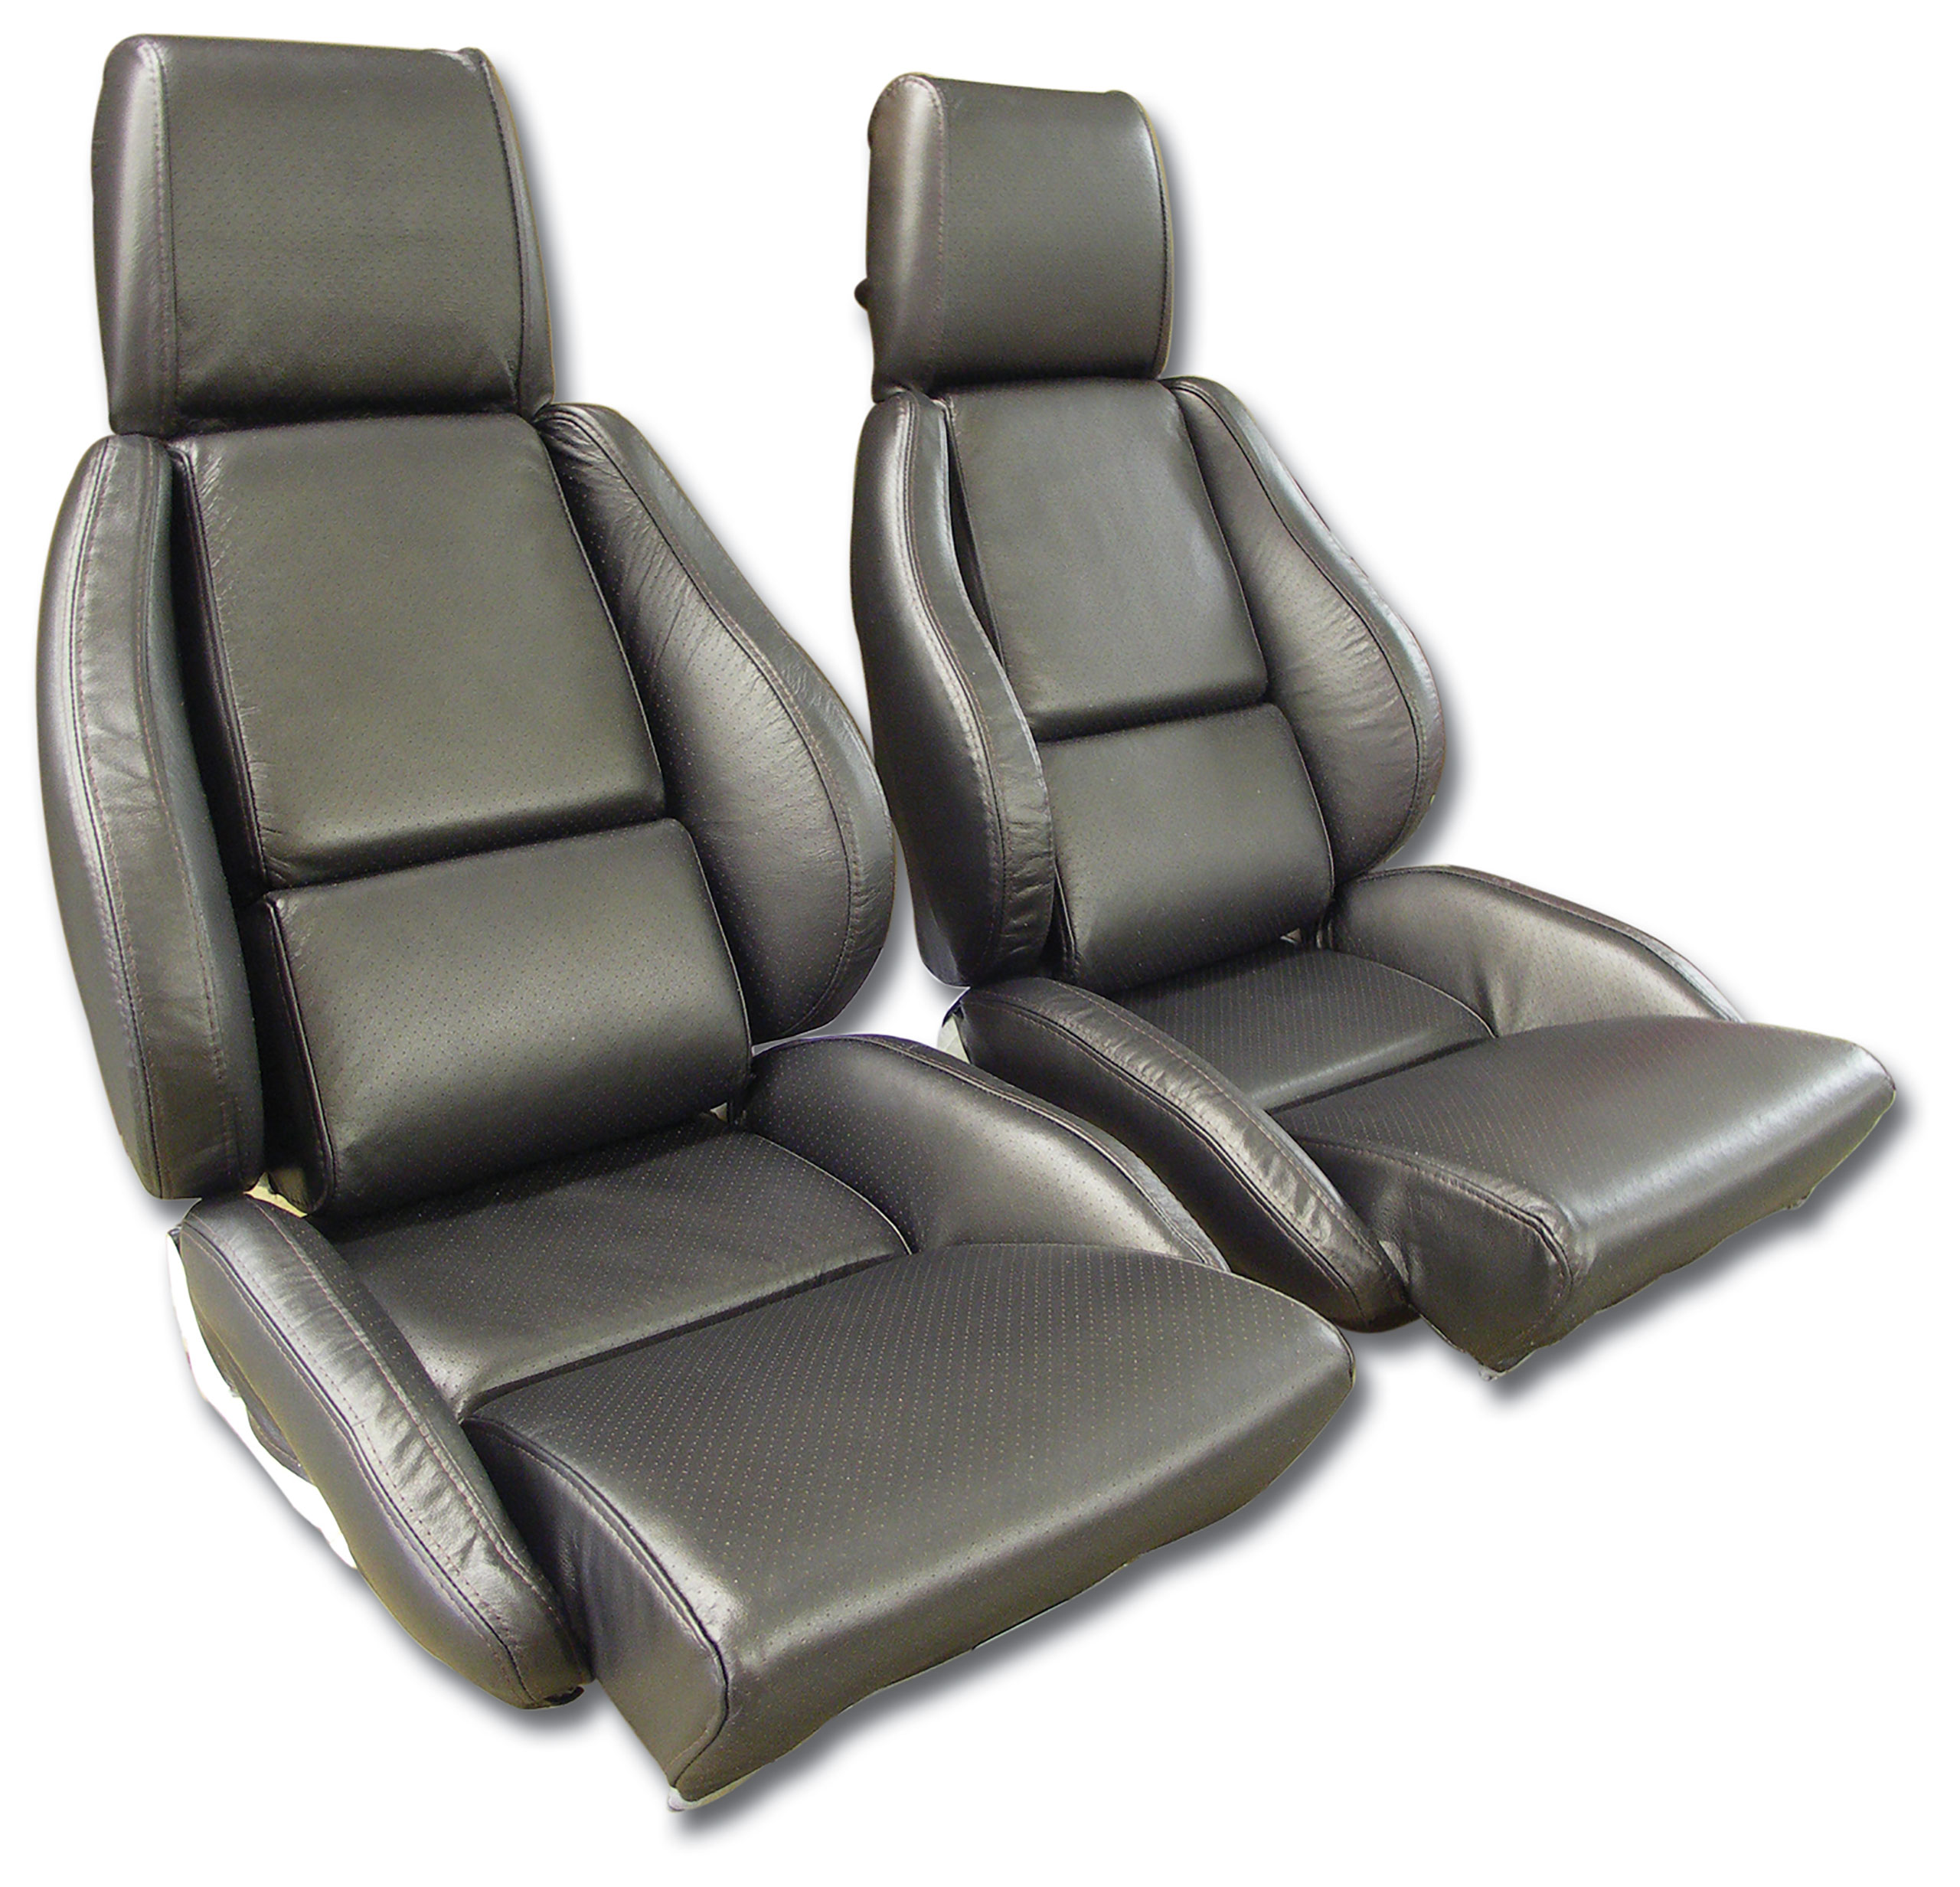 1984-1987 C4 Corvette Mounted Leather Seat Covers Bronze Standard